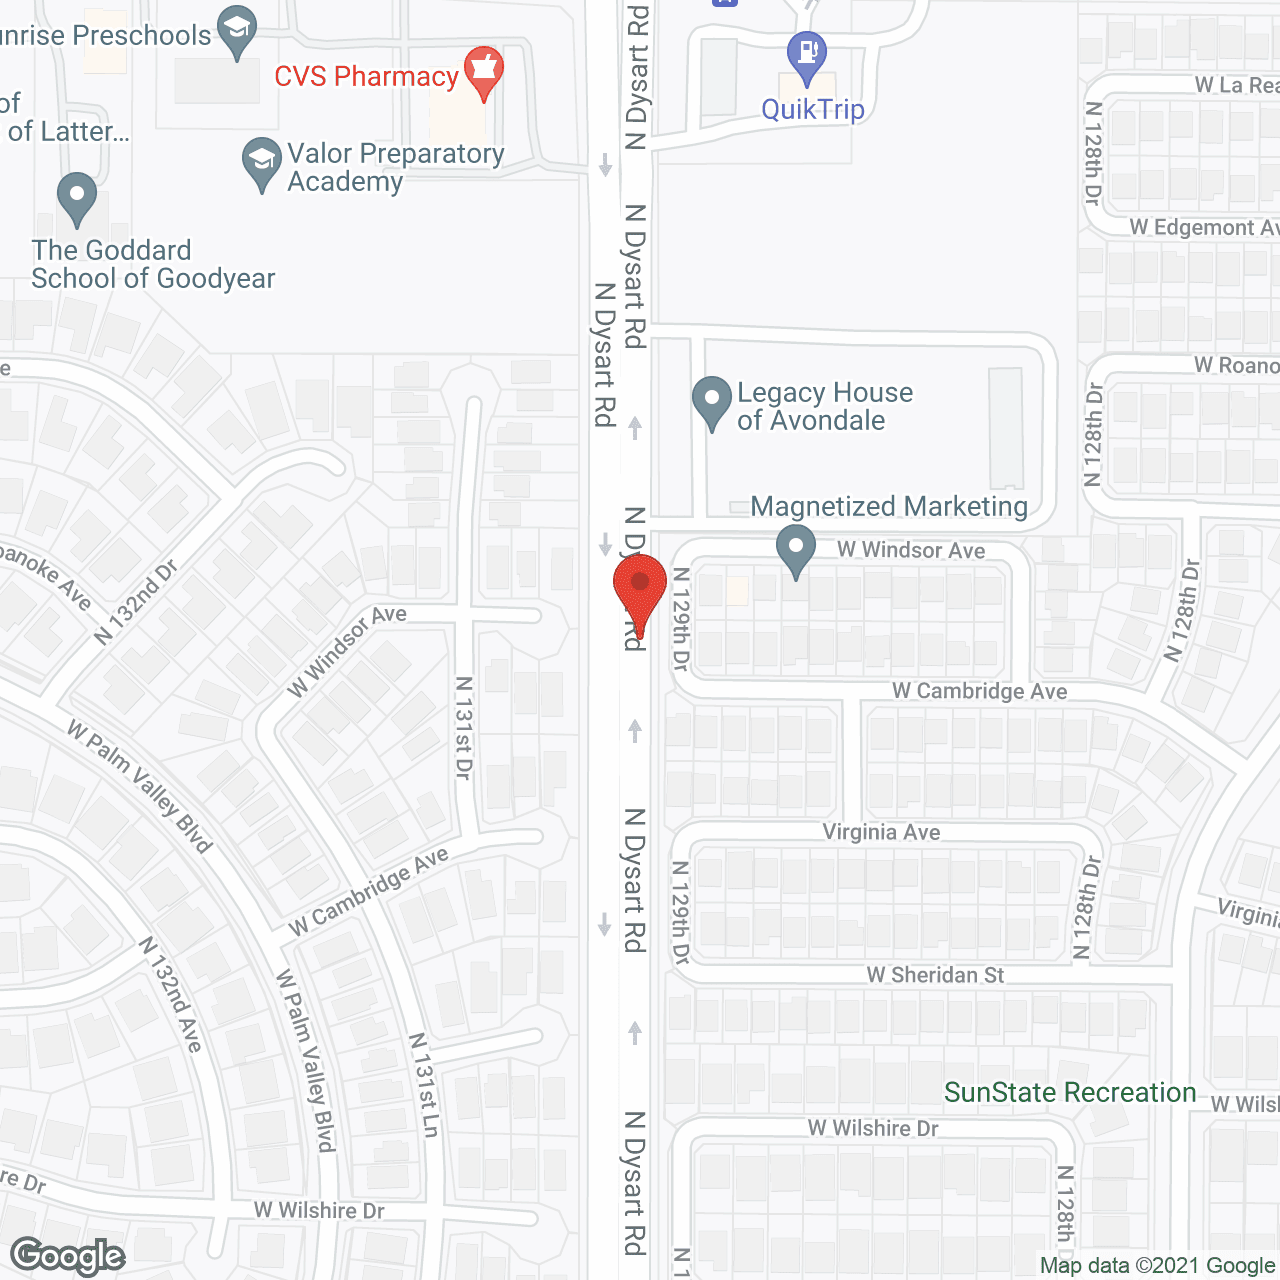 Legacy House of Avondale in google map